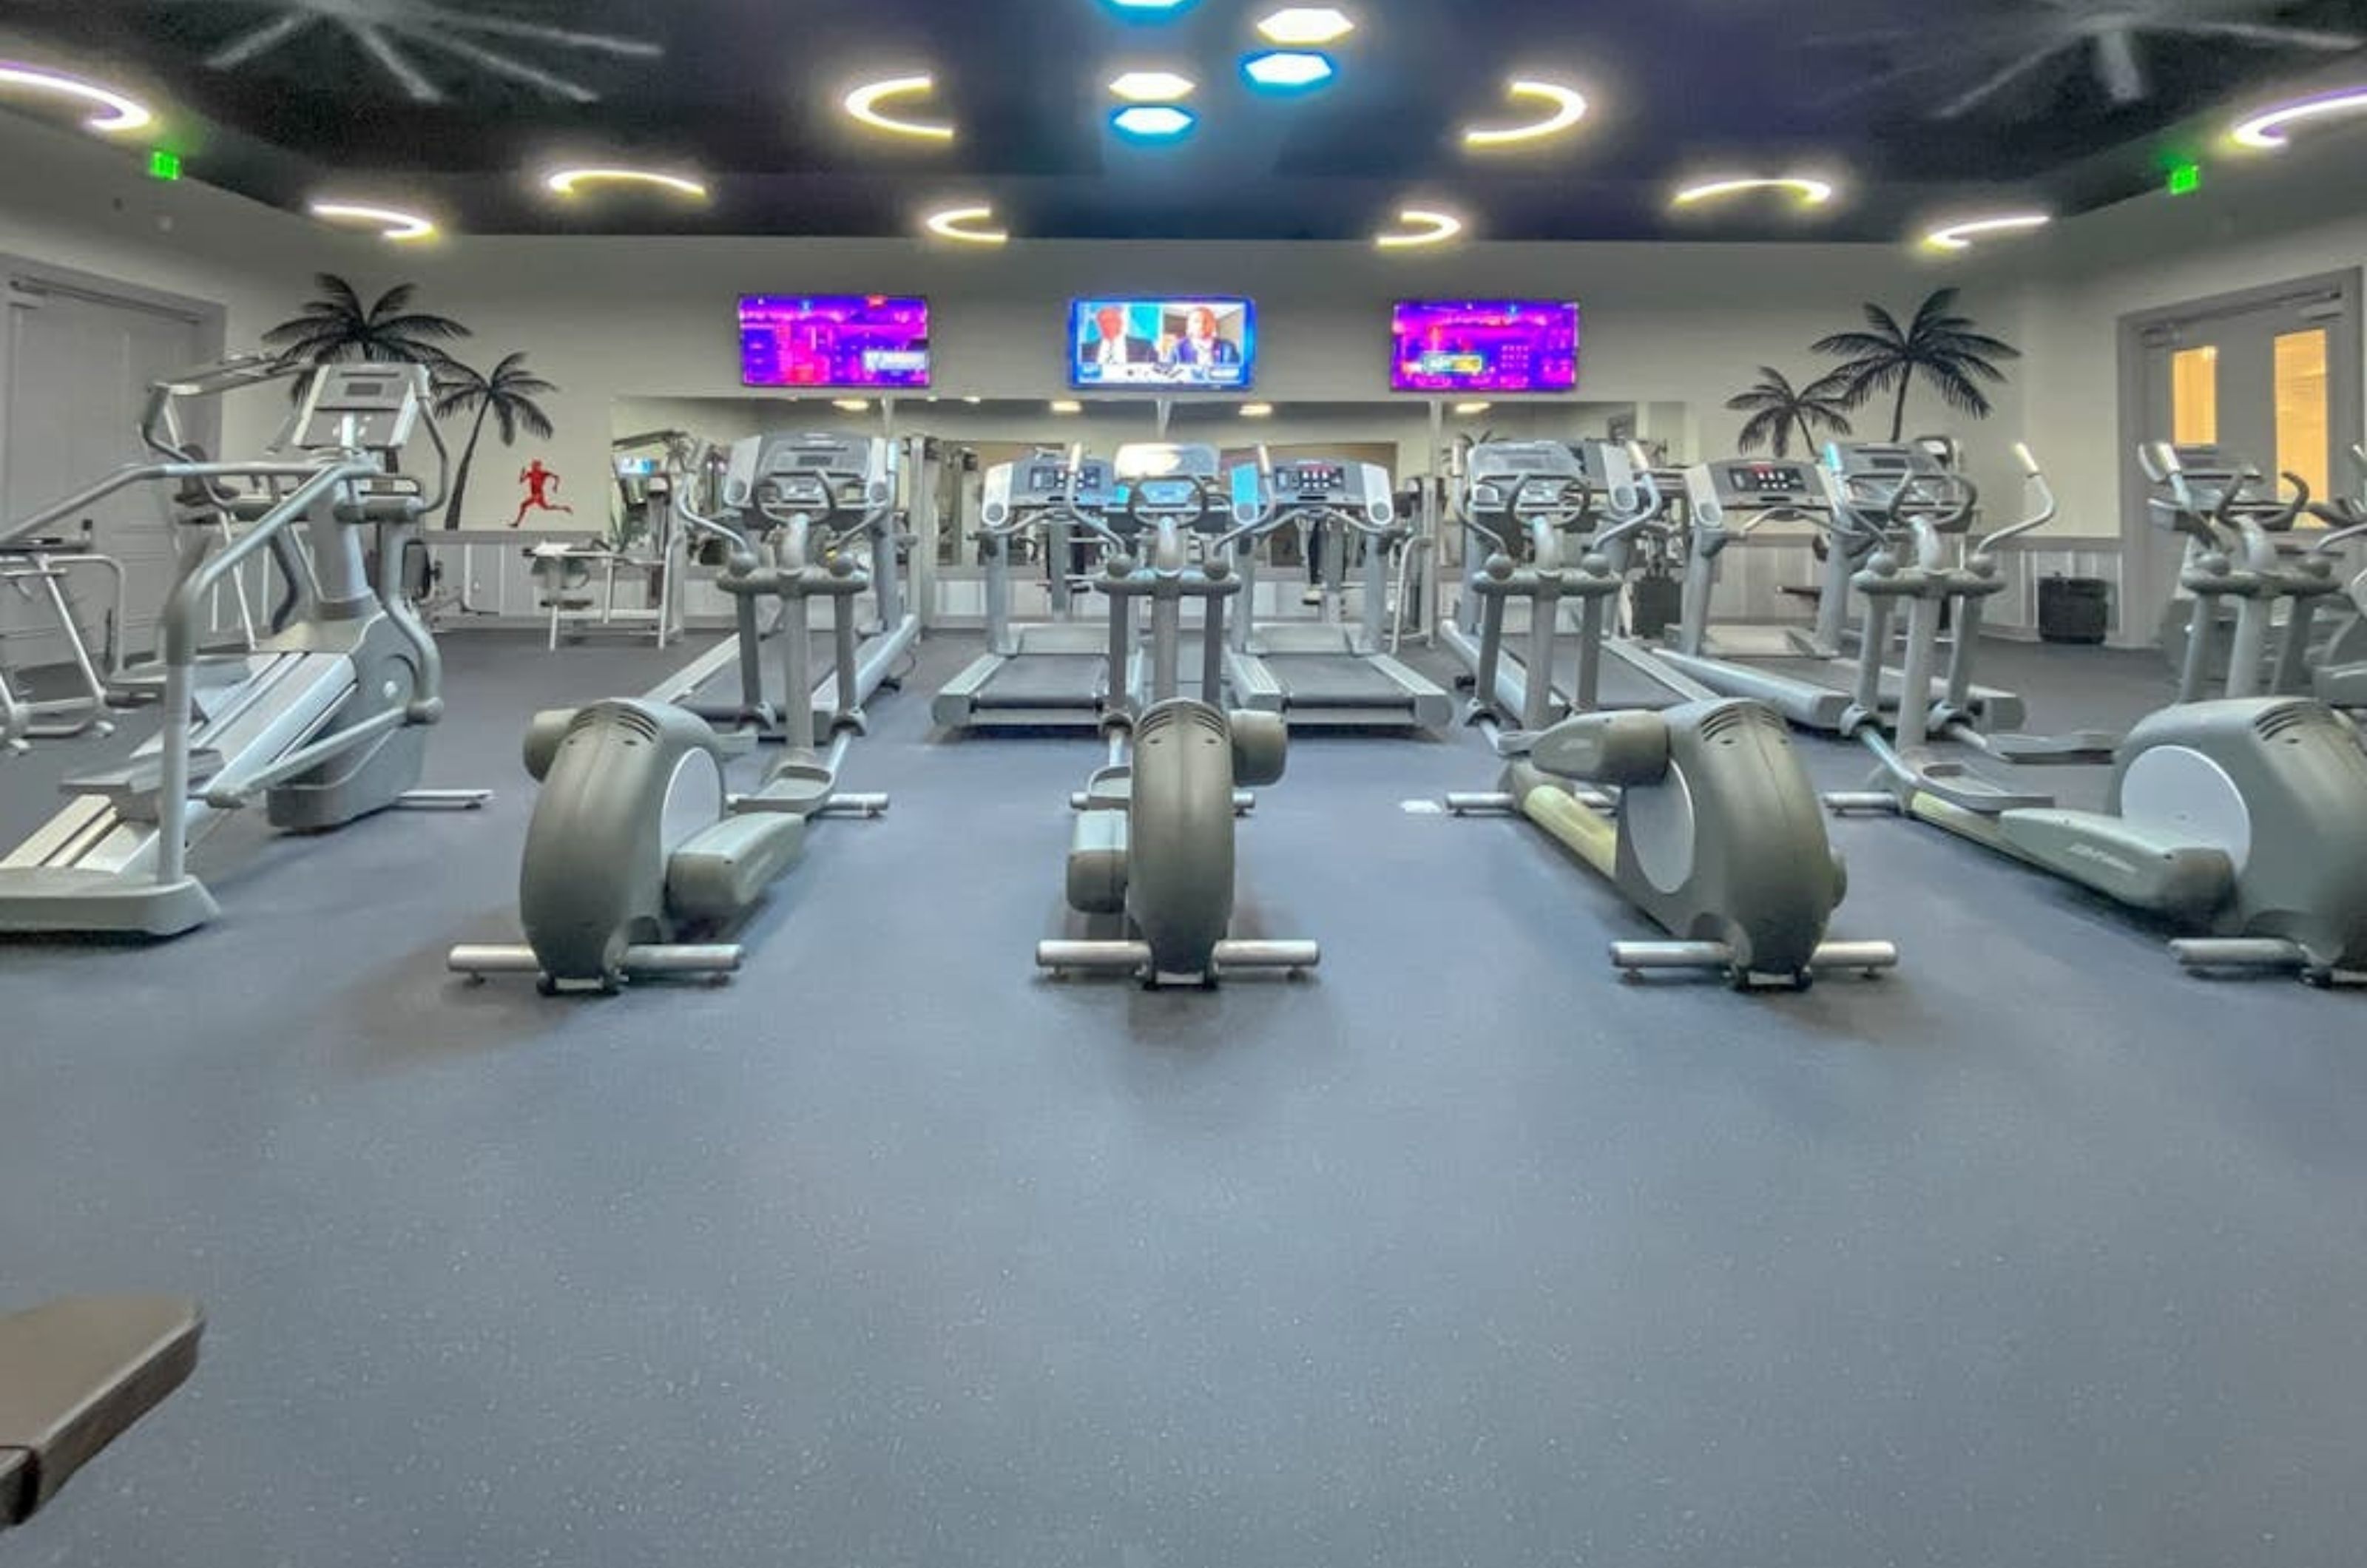 The large 24-hour fitness center at the Palms of Destin in Destin Florida 